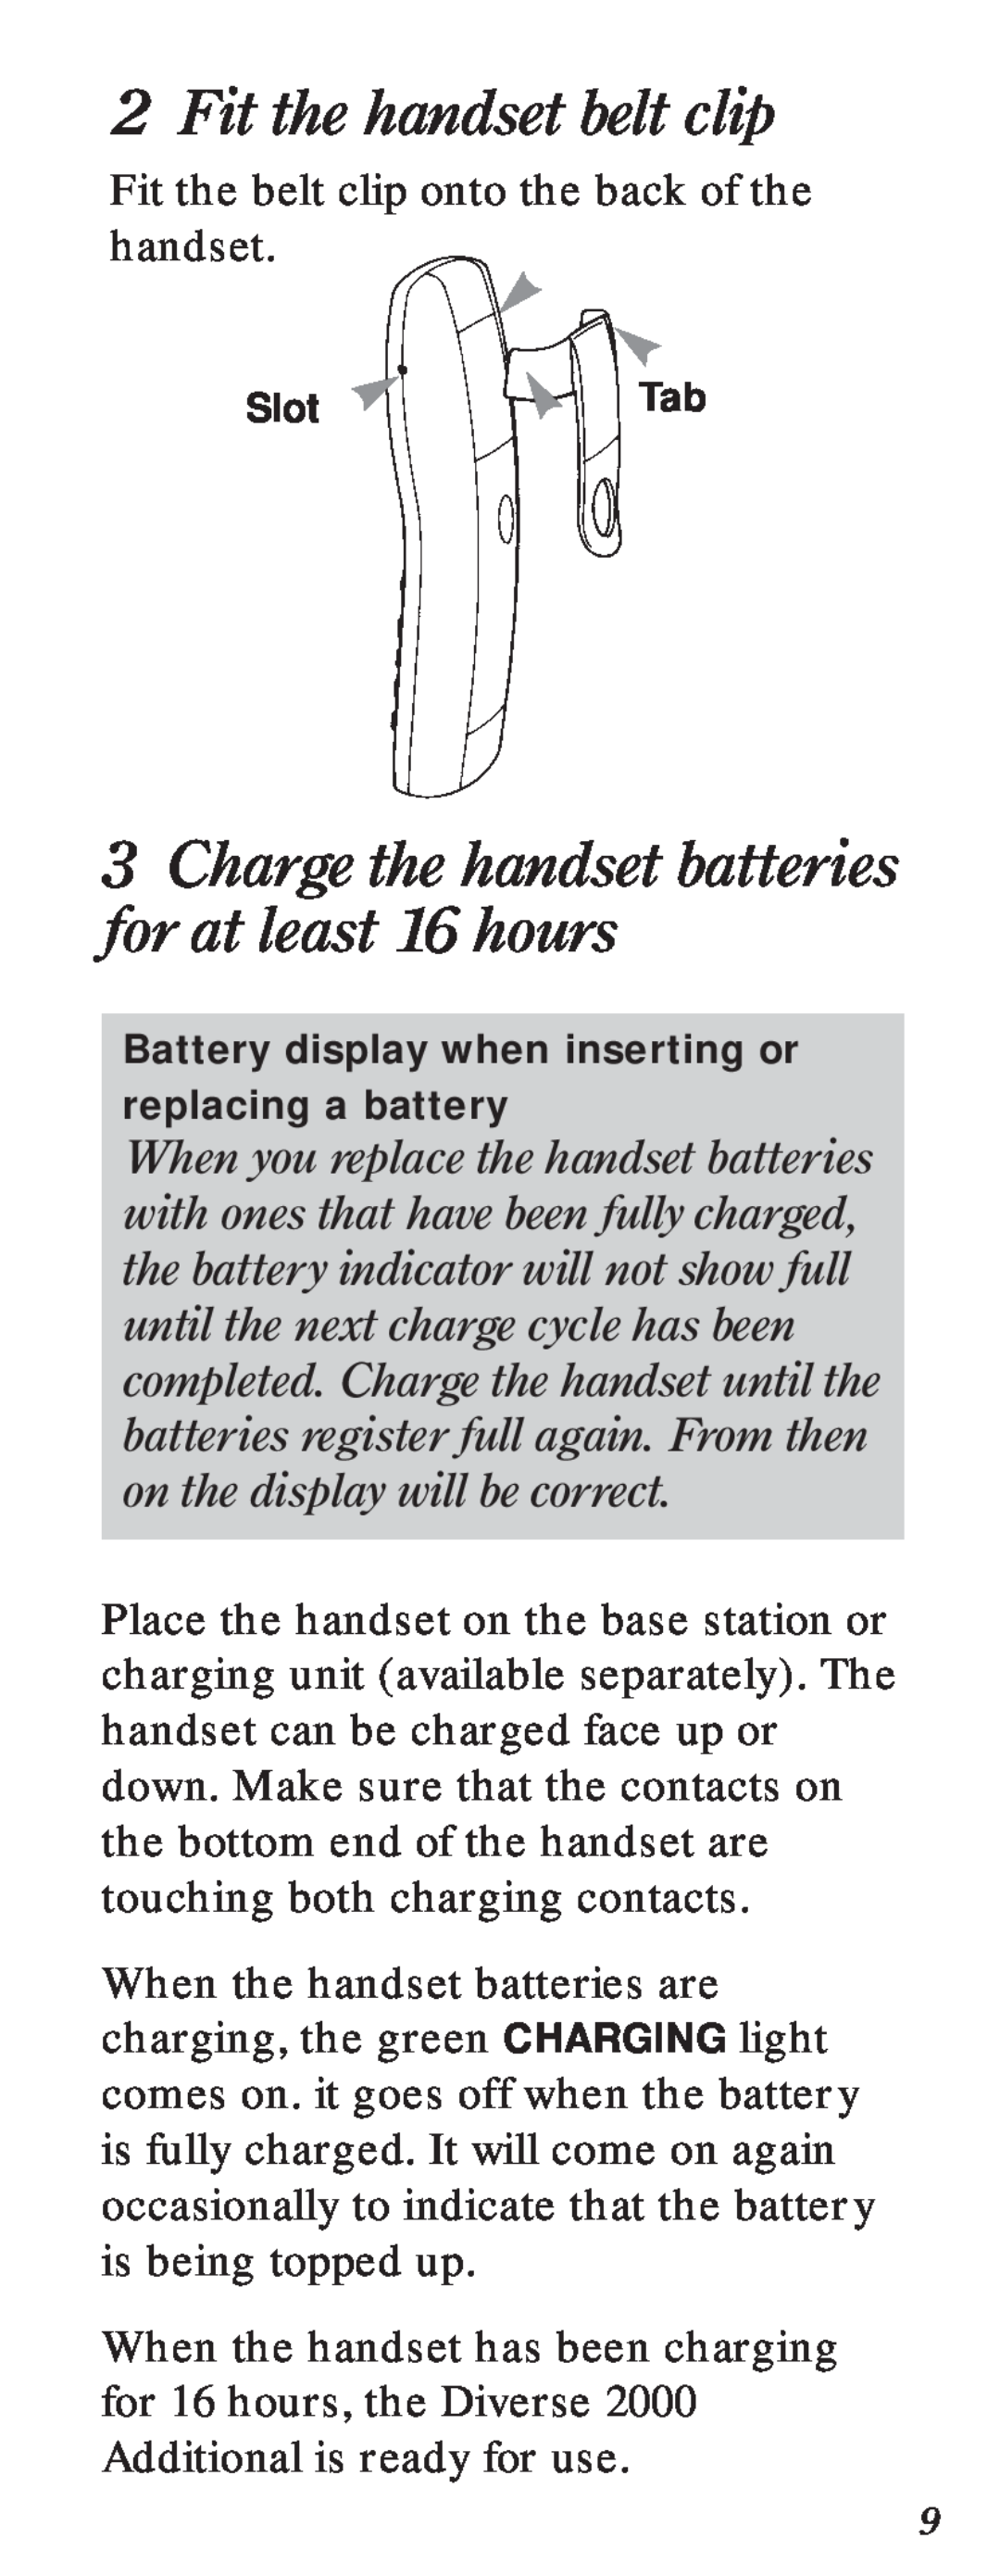 BT 2000 user manual Fit the handset belt clip, Charge the handset batteries for at least 16 hours 